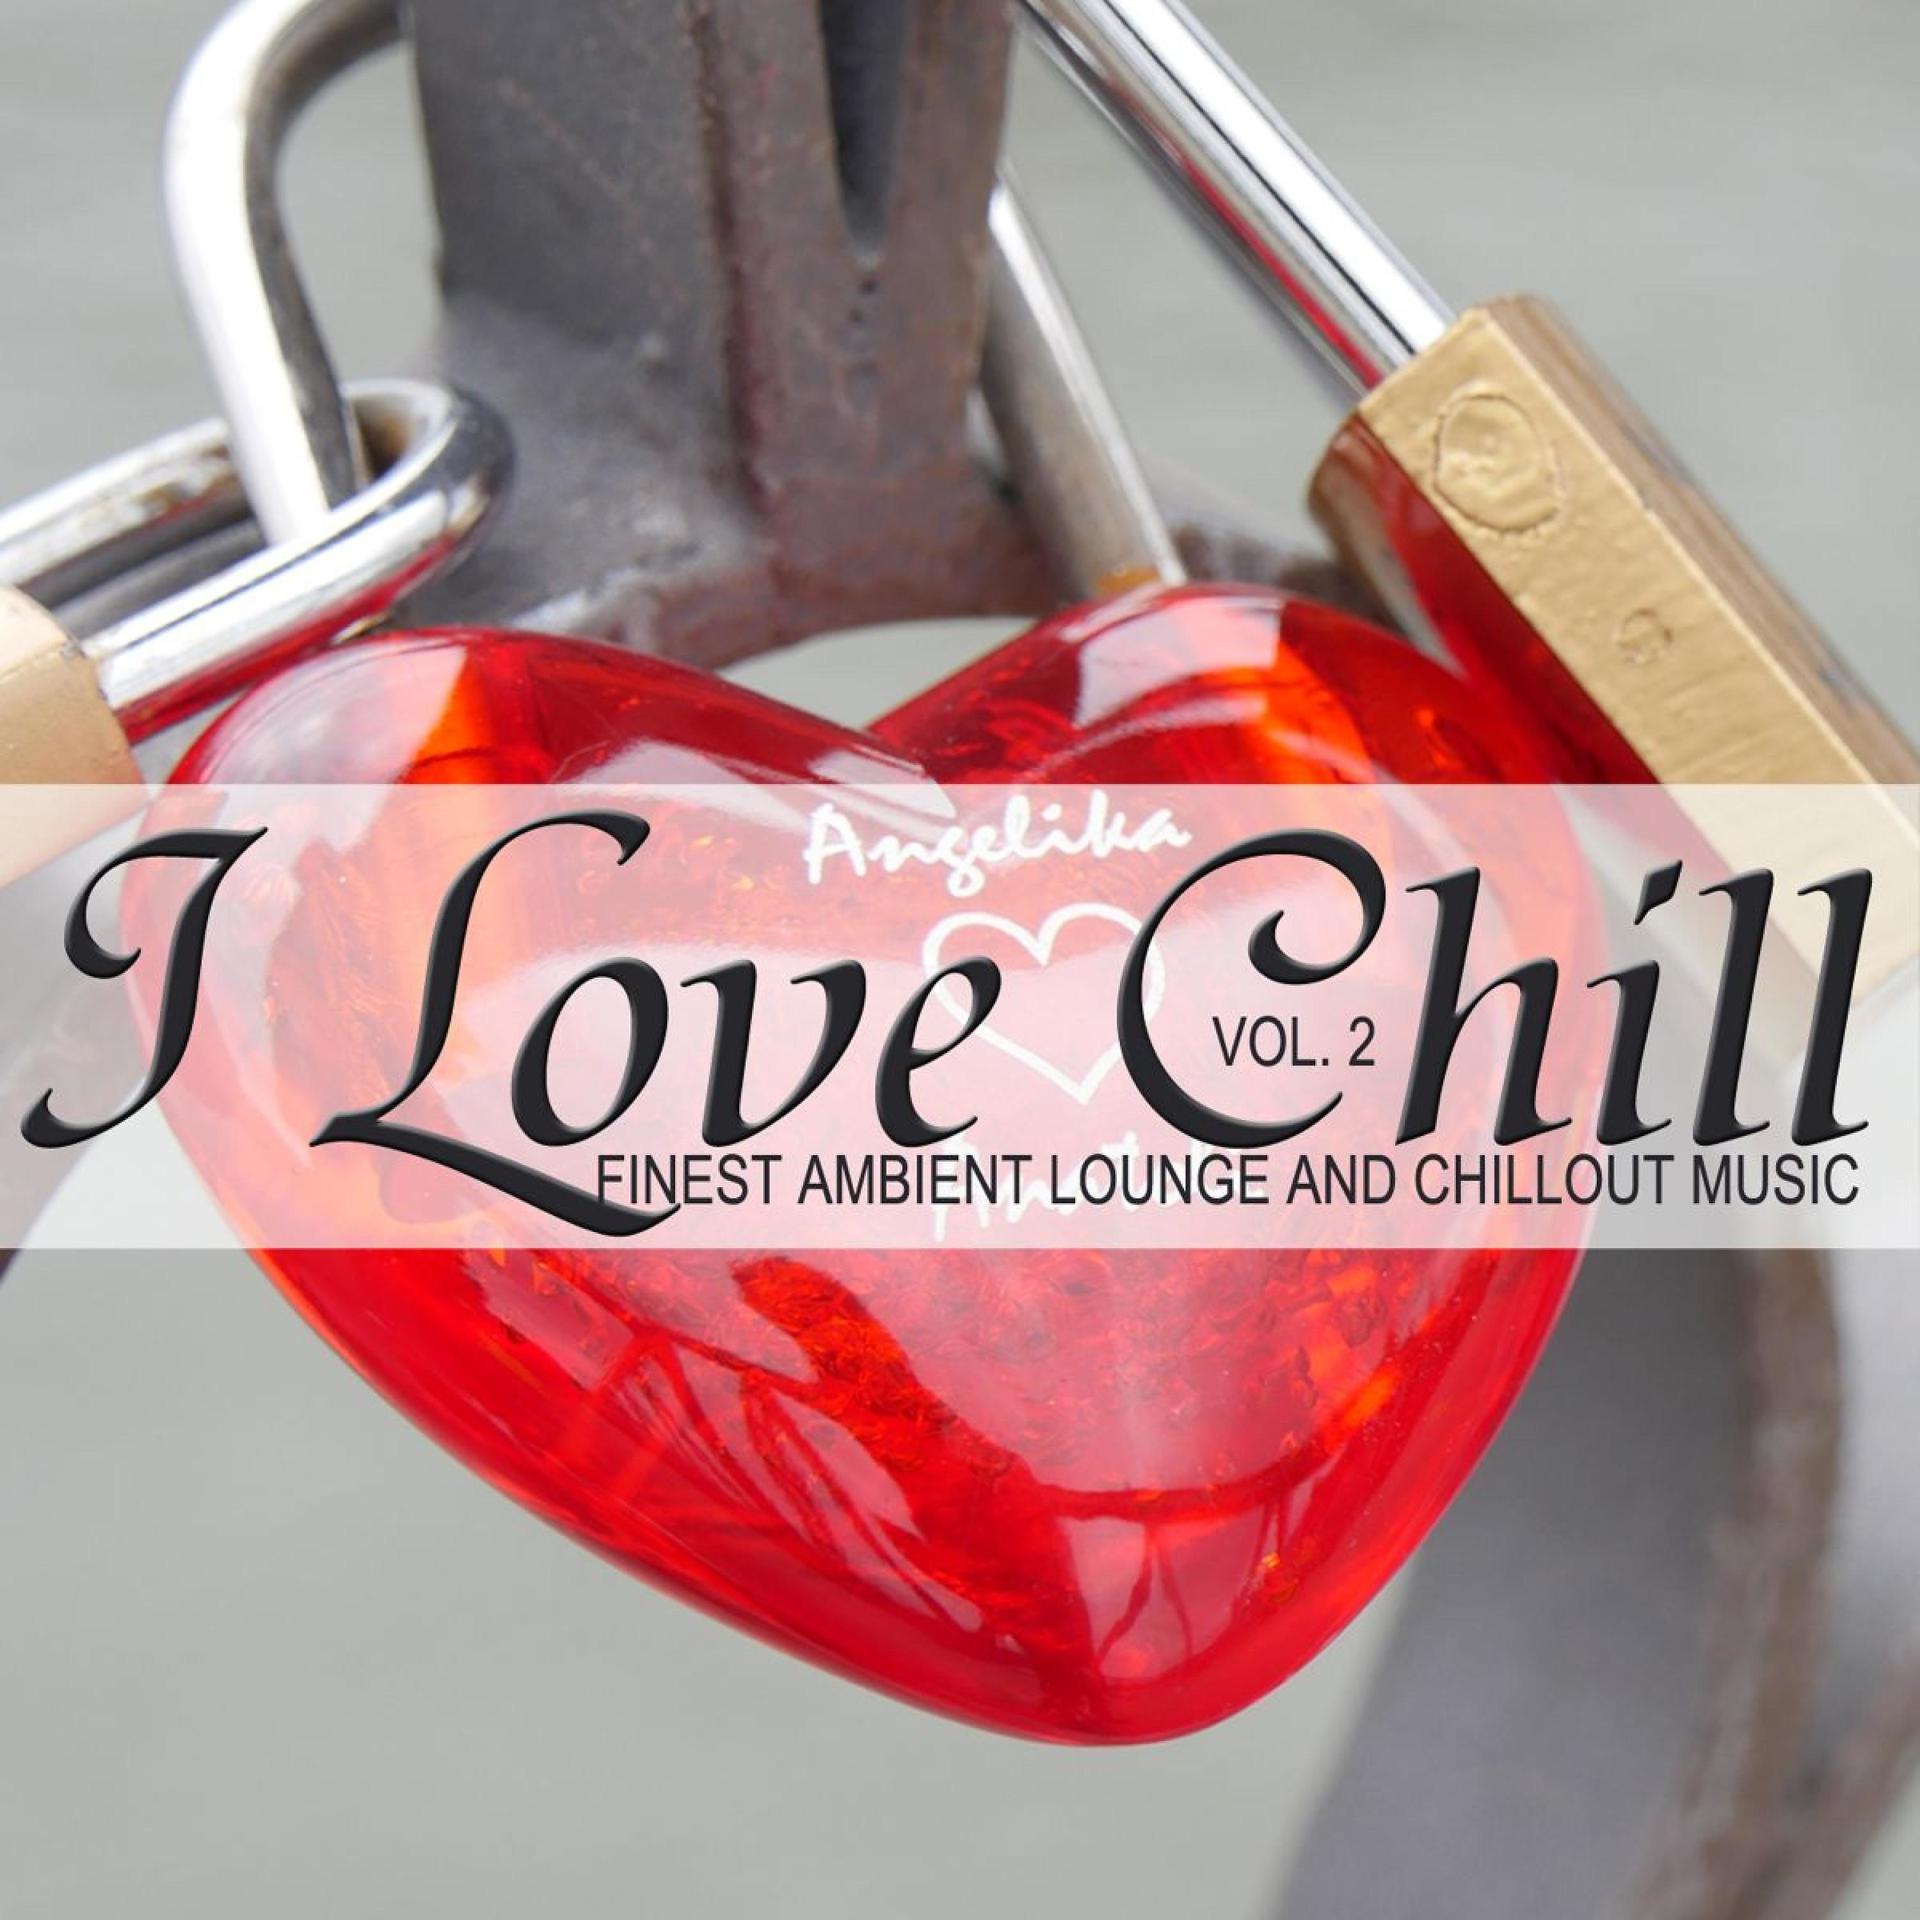 Chilled love. Chilly "for your Love".